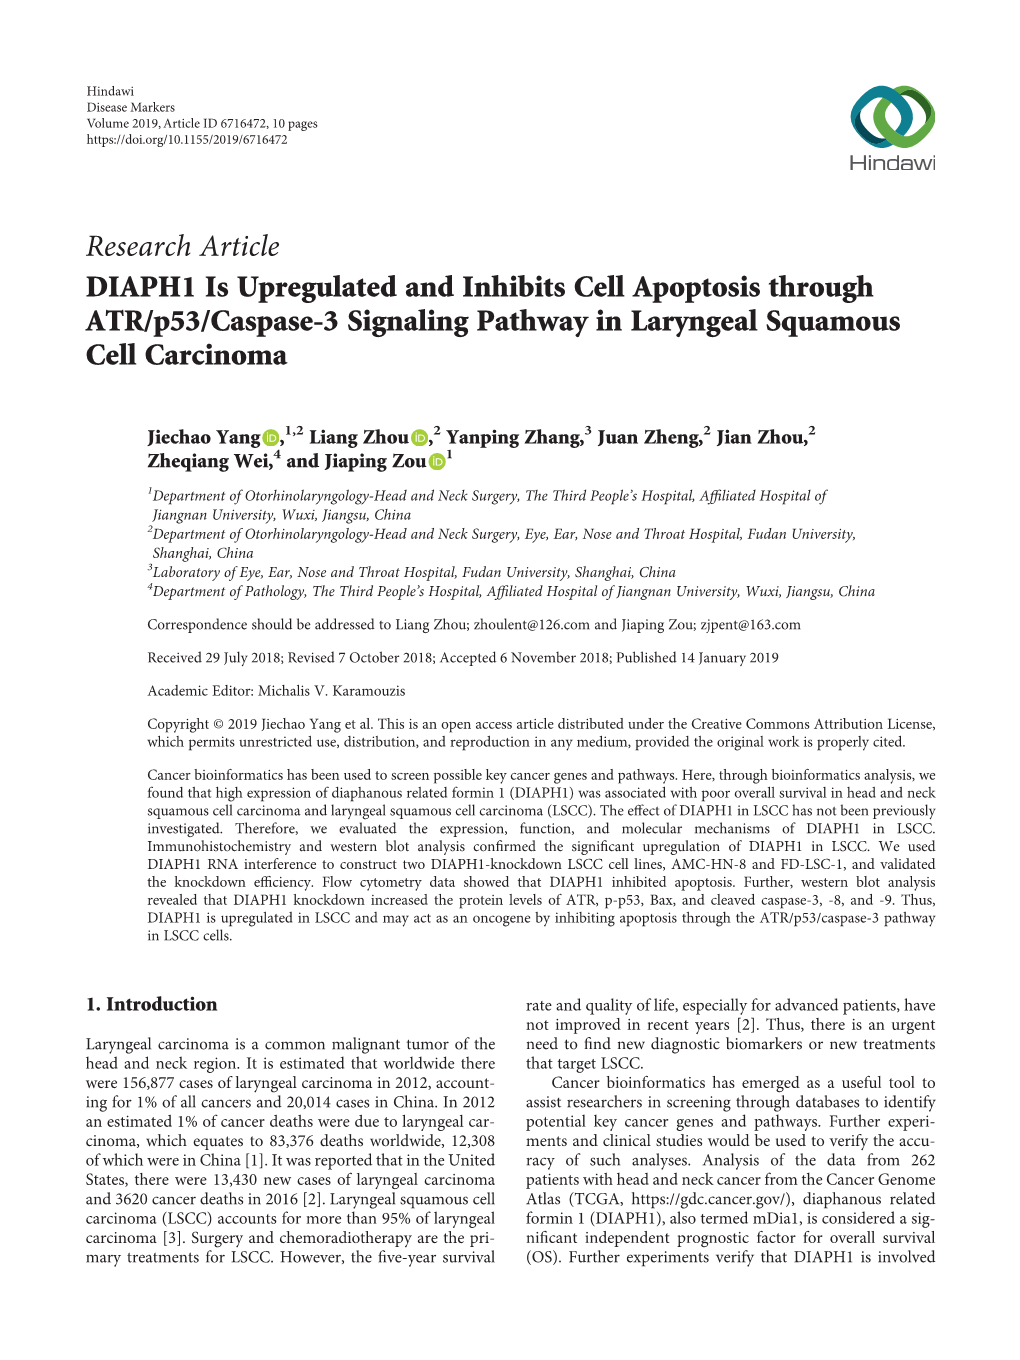 DIAPH1 Is Upregulated and Inhibits Cell Apoptosis Through ATR/P53/Caspase-3 Signaling Pathway in Laryngeal Squamous Cell Carcinoma